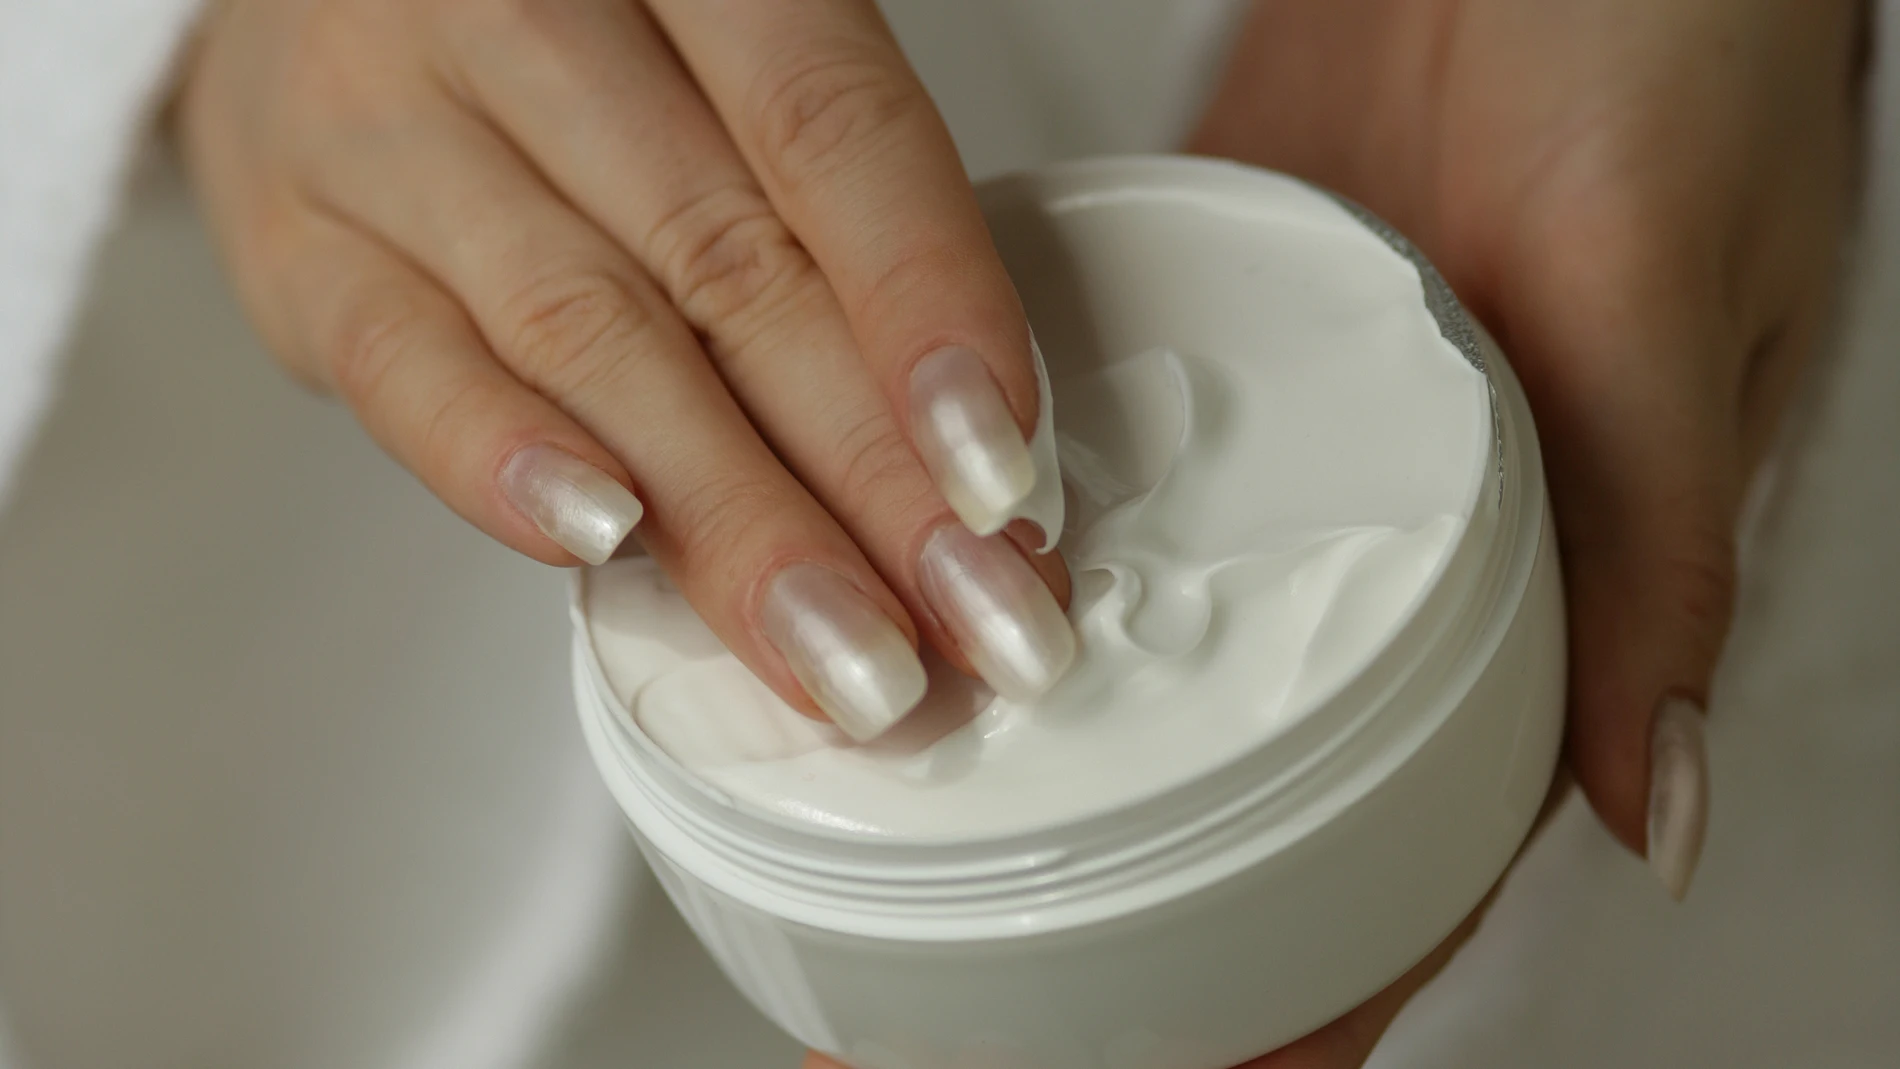 A midsection of a woman holding a box full of white cream. Cream Gel Box Bathrobe Hands Nails Fingers White One Person One Female One Lady One Woman Taking Unknown Emollient Moisturizer Soothing Softening Salving Front View High Angle View Midsection Blurred Differential Focus Vertical Color Image Photography beauty creme handcreme hand finger detail hautpflege koerperpflege people A midsection of a woman holding a box full of white cream.